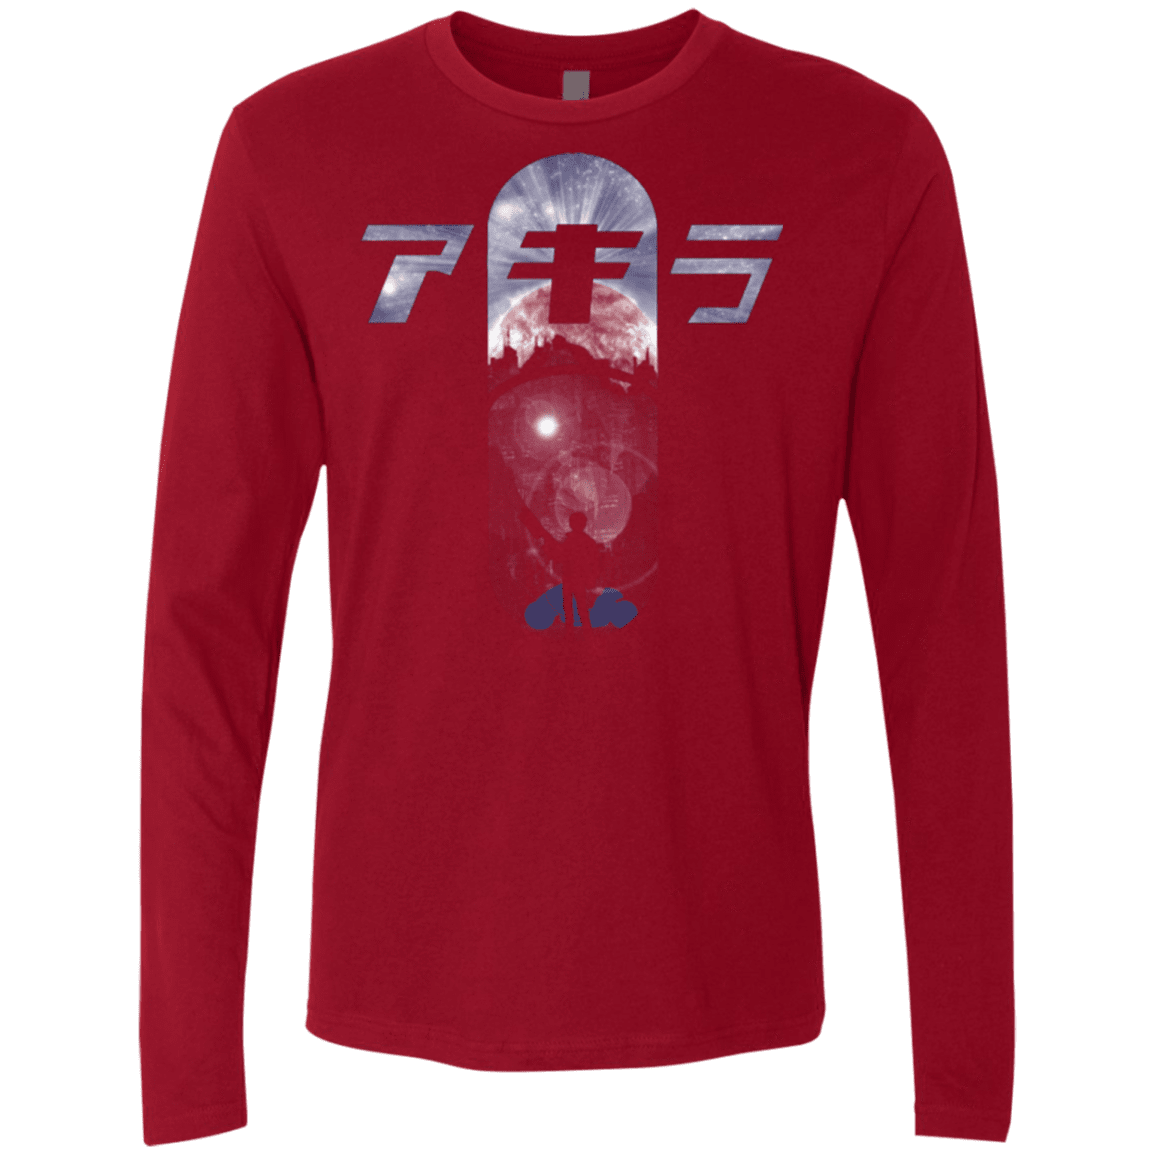 T-Shirts Cardinal / Small About to Explode Men's Premium Long Sleeve